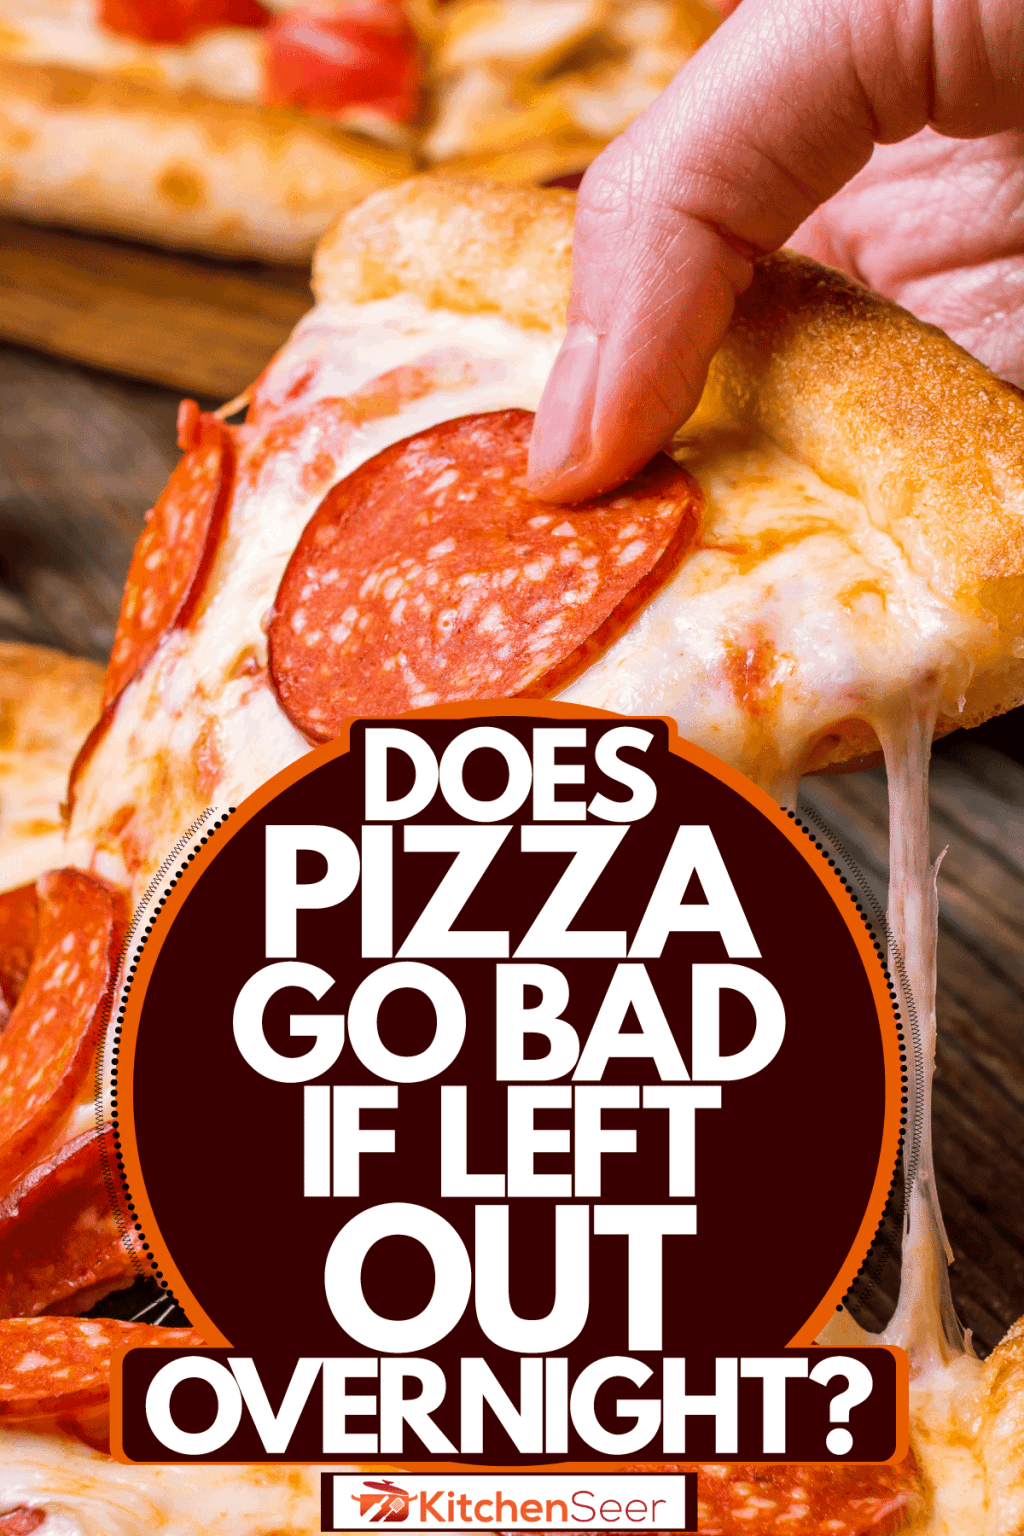 Does Pizza Go Bad If Left Out Overnight? - Kitchen Seer